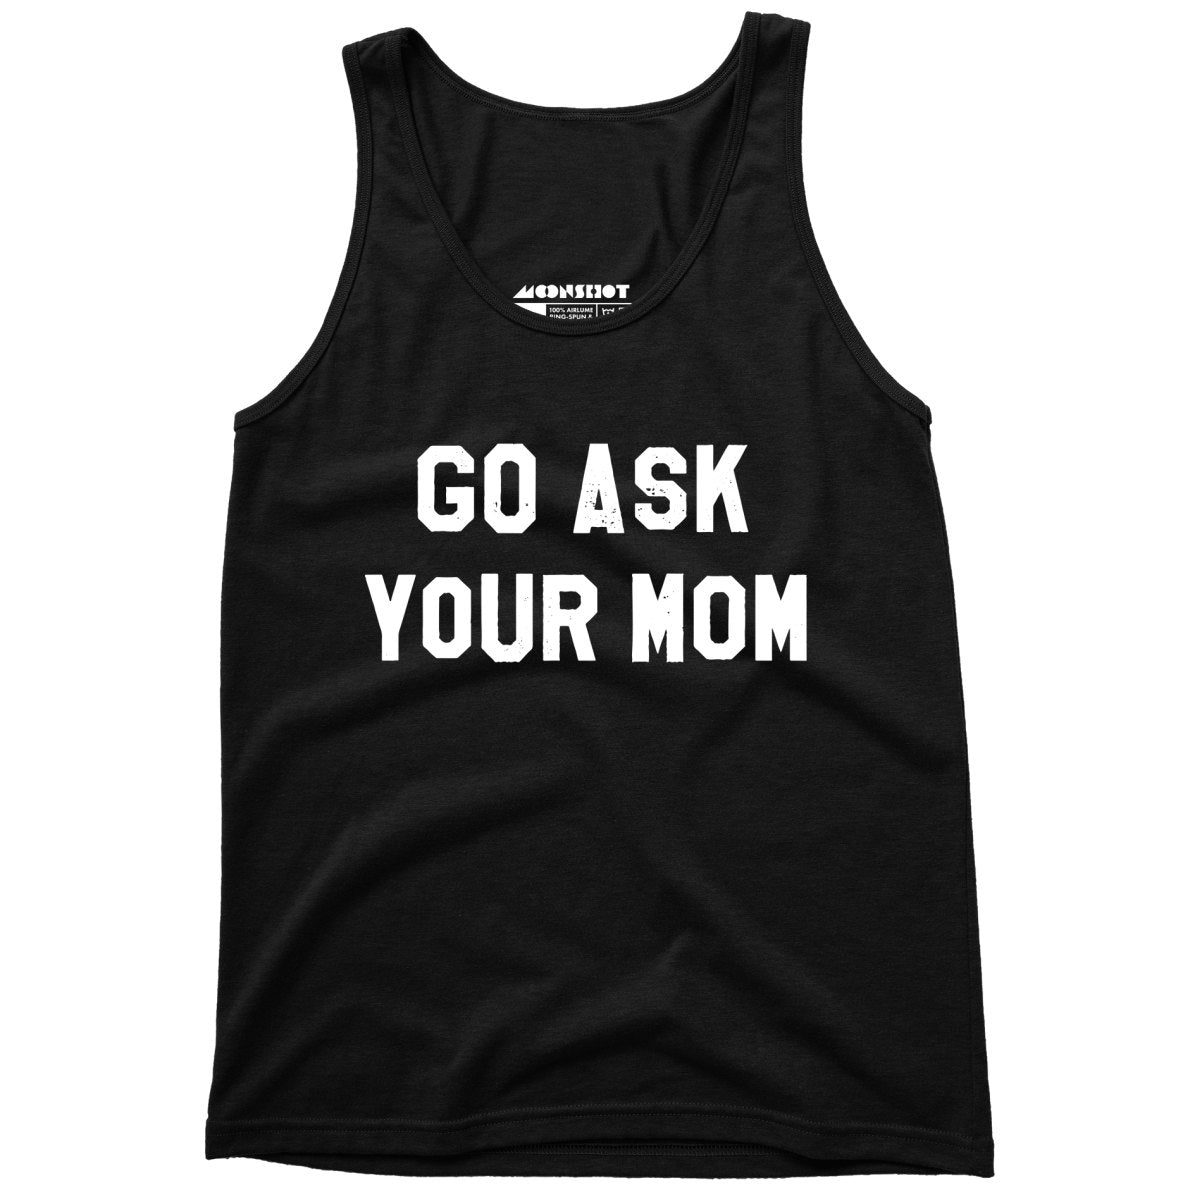 Go Ask Your Mom - Unisex Tank Top